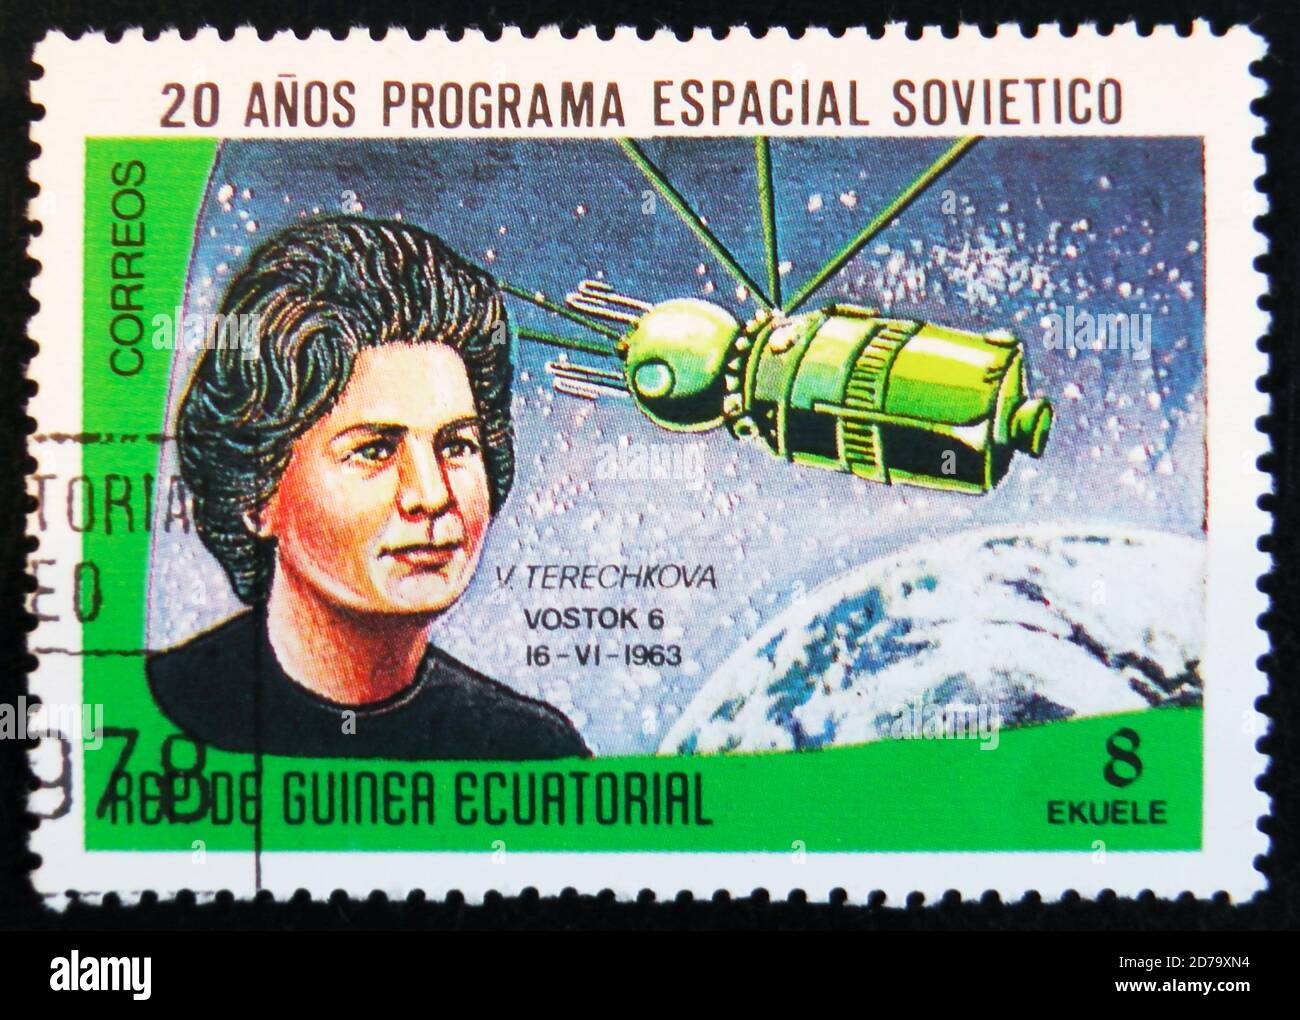 MOSCOW, RUSSIA - APRIL 2, 2017: A stamp printed in Guinea Equatorial shows Vostok 6 spaceship, 1962, and portrait of astronaut V. Tereshkova, circa 19 Stock Photo